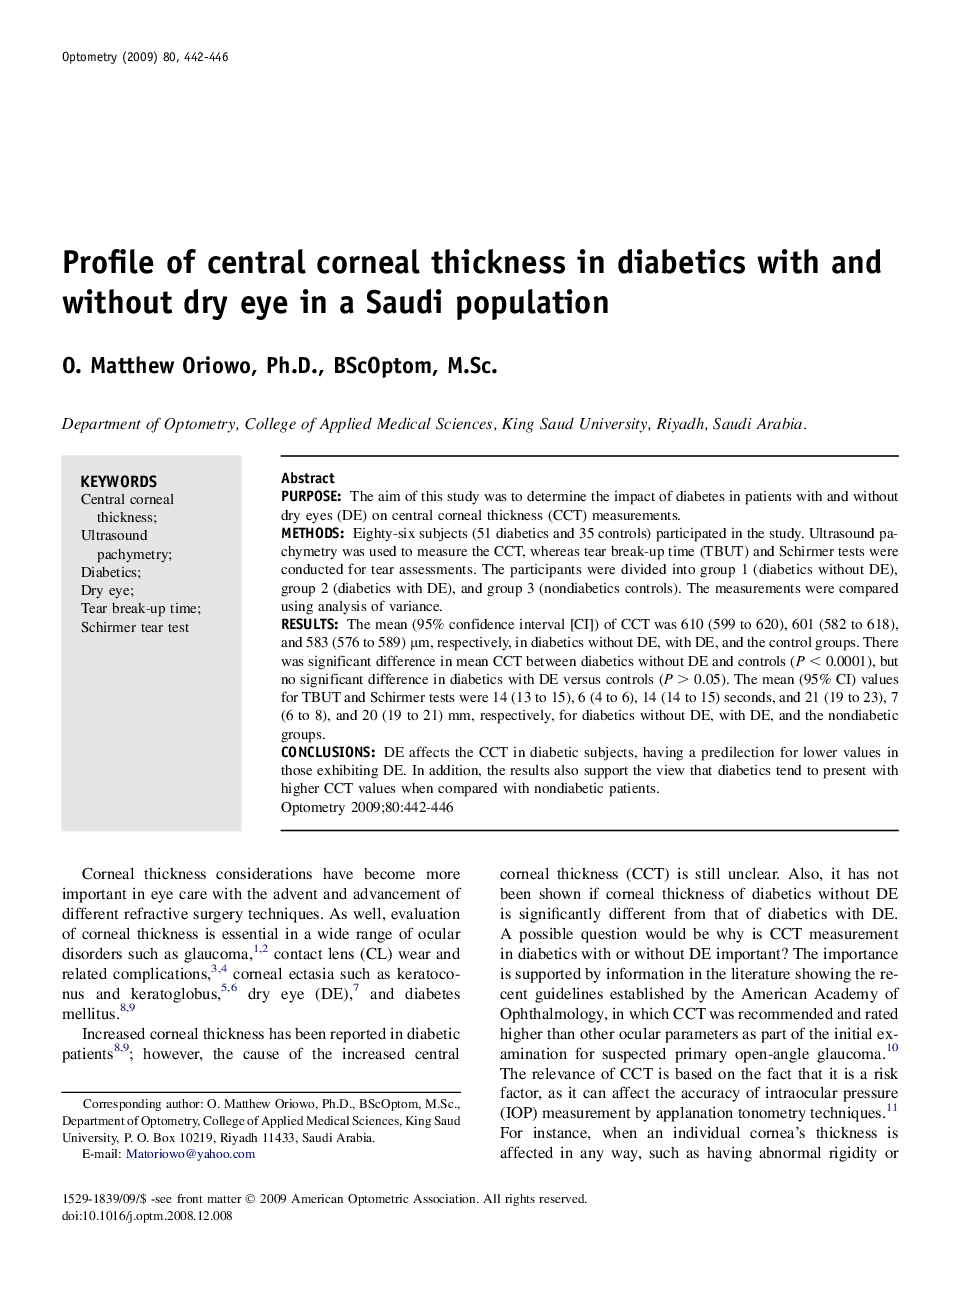 Profile of central corneal thickness in diabetics with and without dry eye in a Saudi population